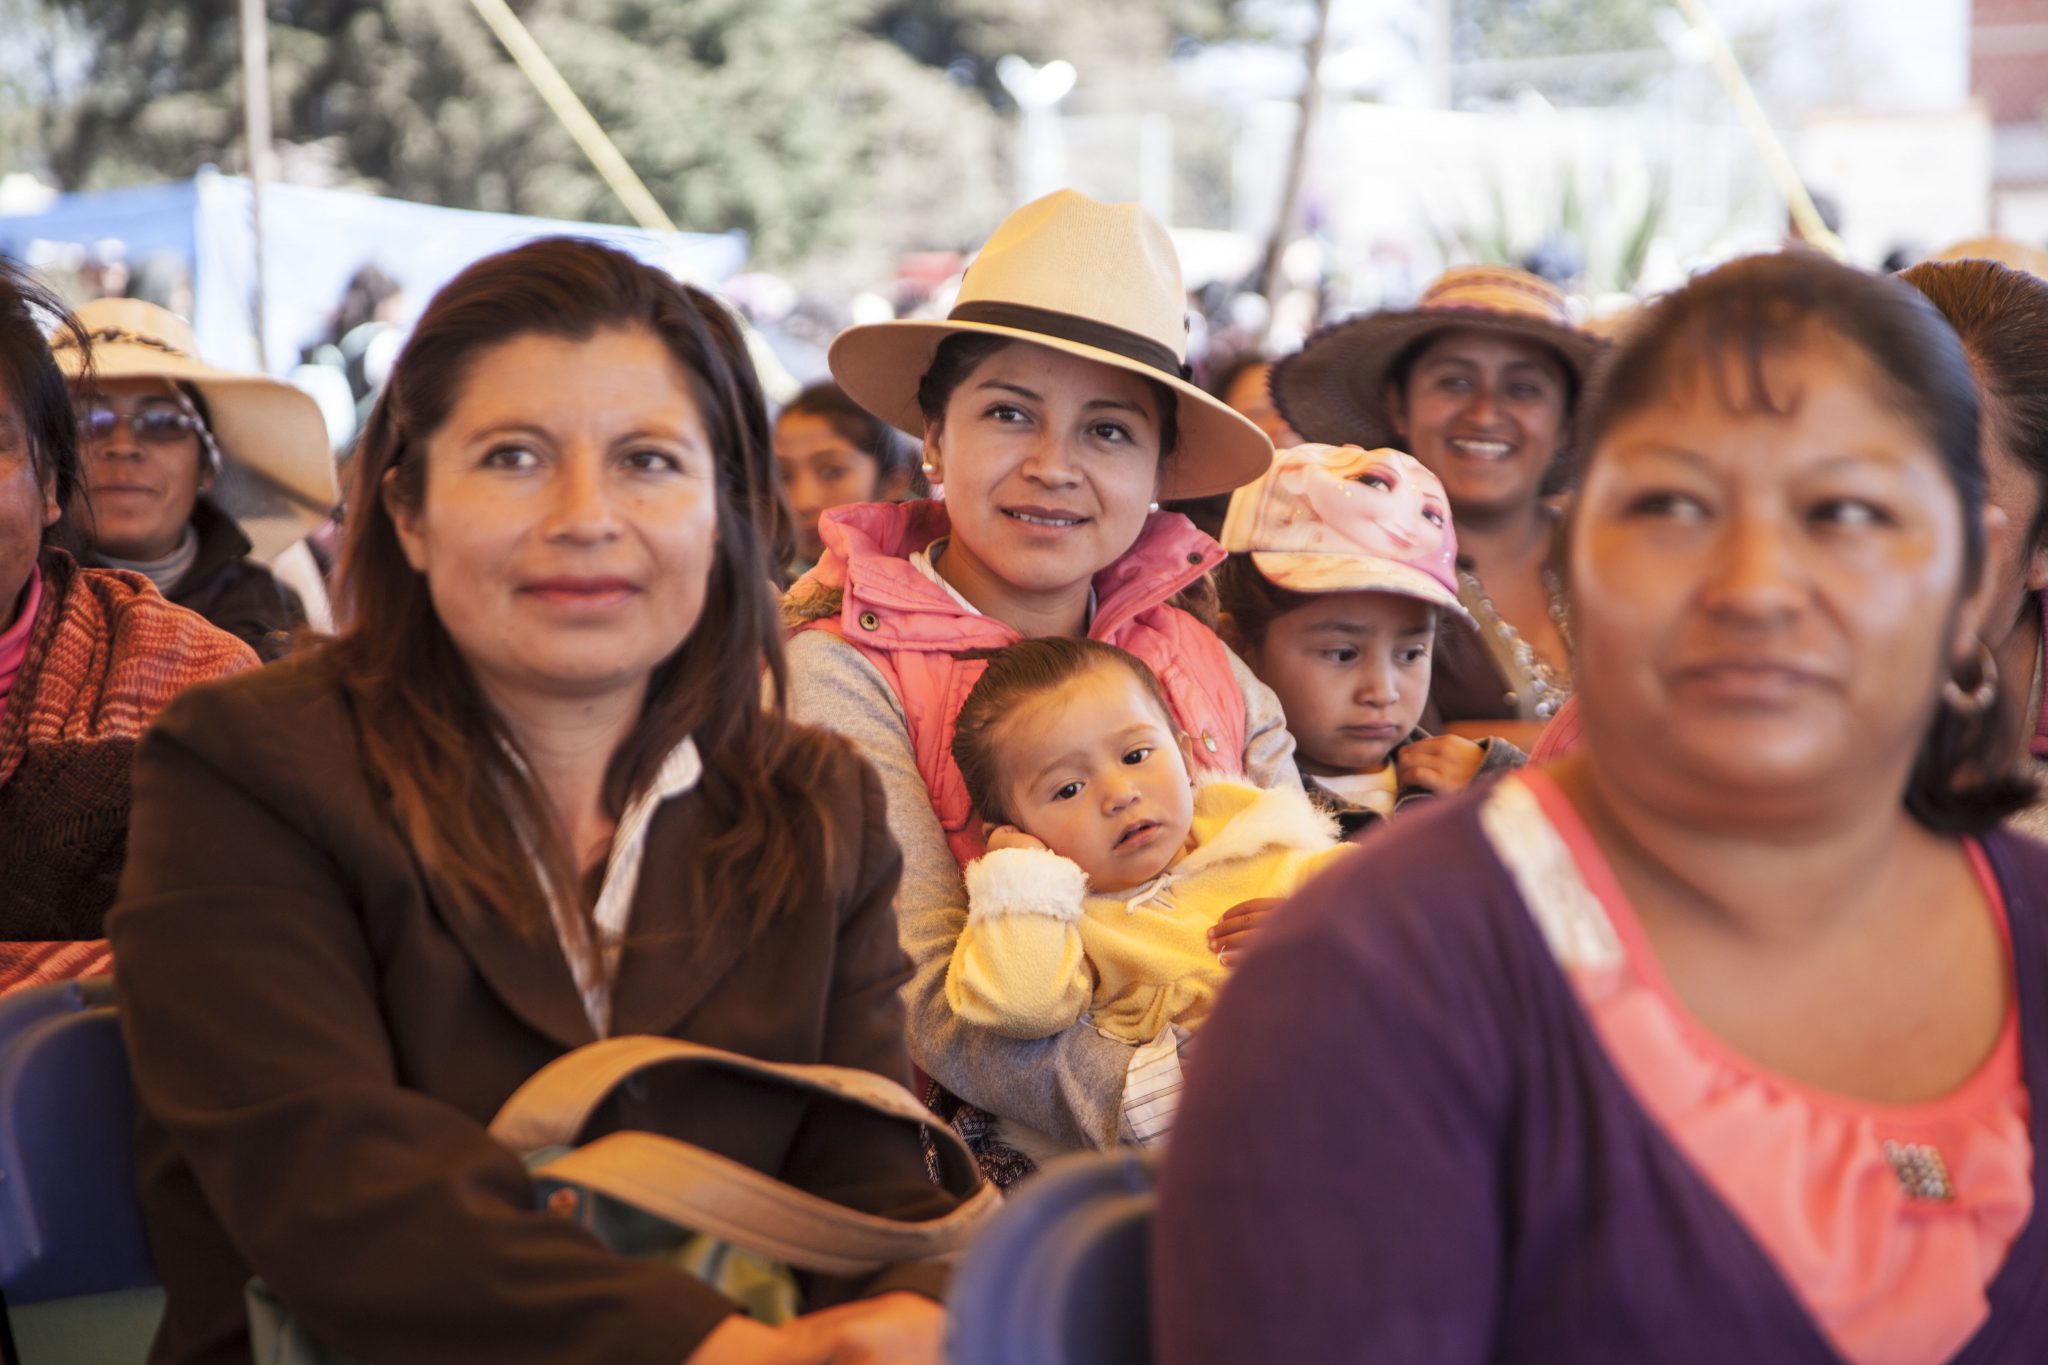 Fundación Origen and its Great Impact on Women in Mexico